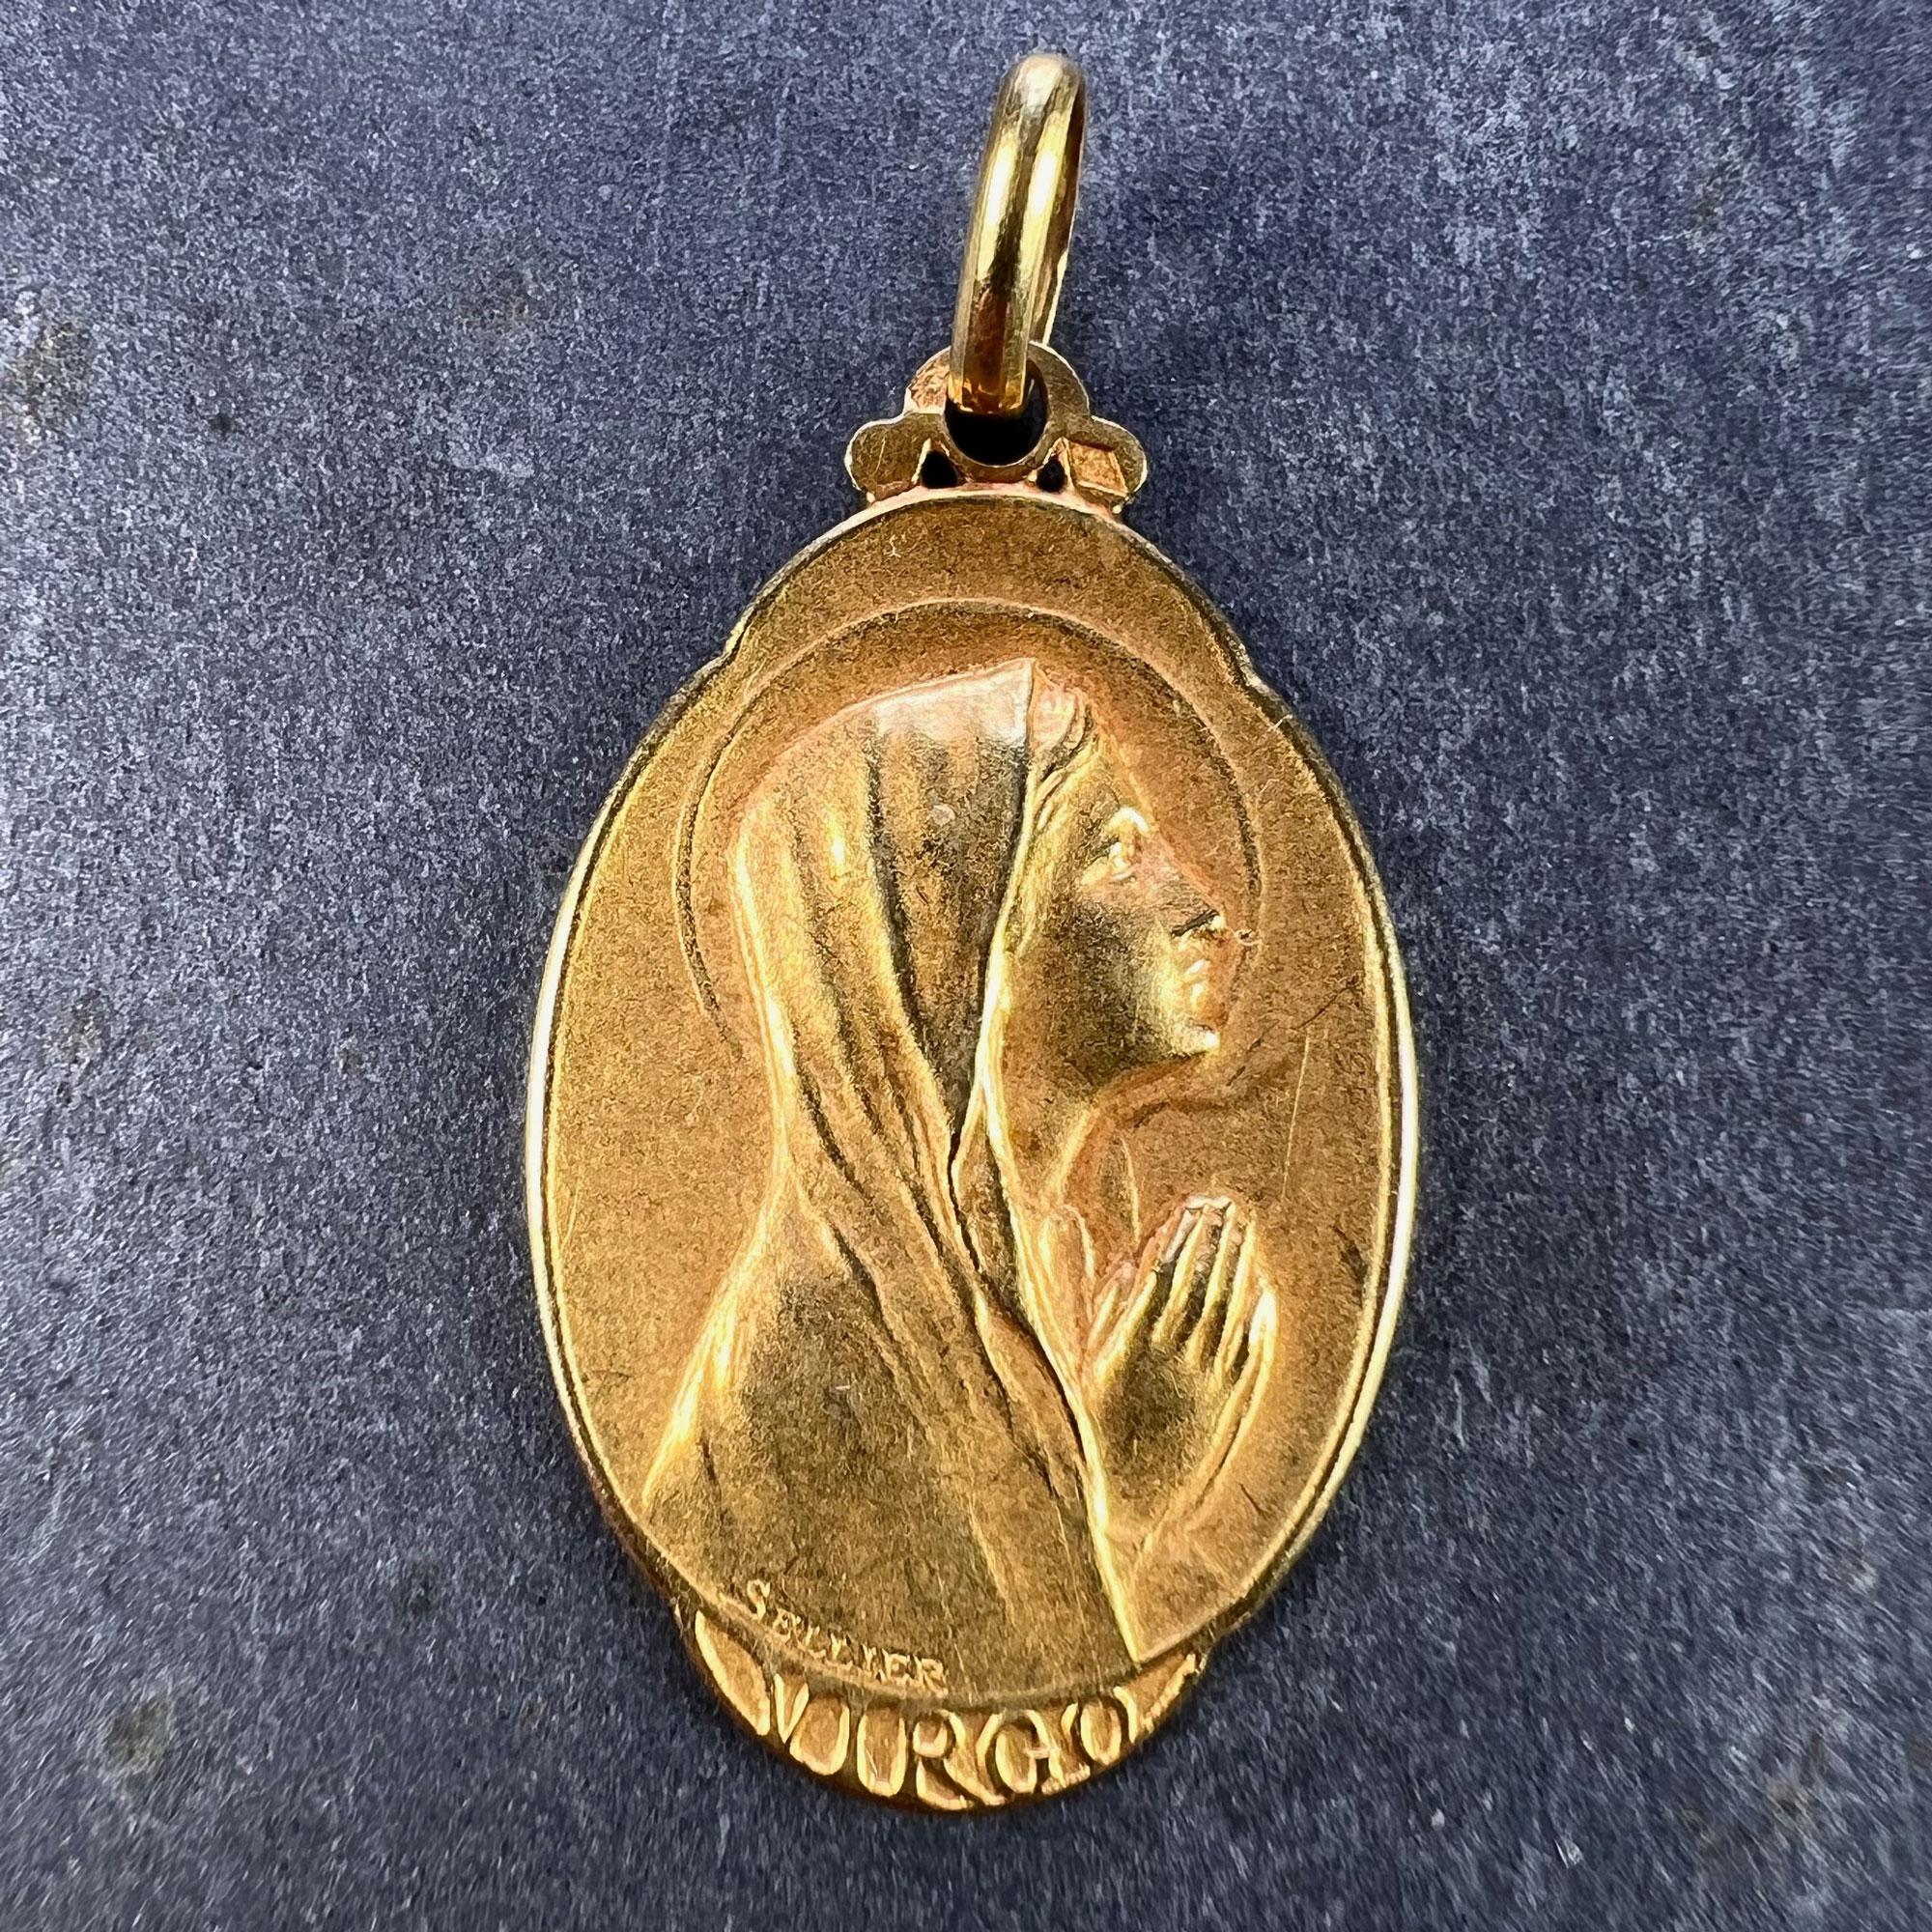 An 18 karat (18K) yellow gold charm pendant designed as a medal depicting the Virgin Mary praying in profile over the word ‘VIRGO’. Engraved with a monogram for FB or BF and the date 26 Mai 1940. Signed Sellier, stamped with the eagle mark for 18